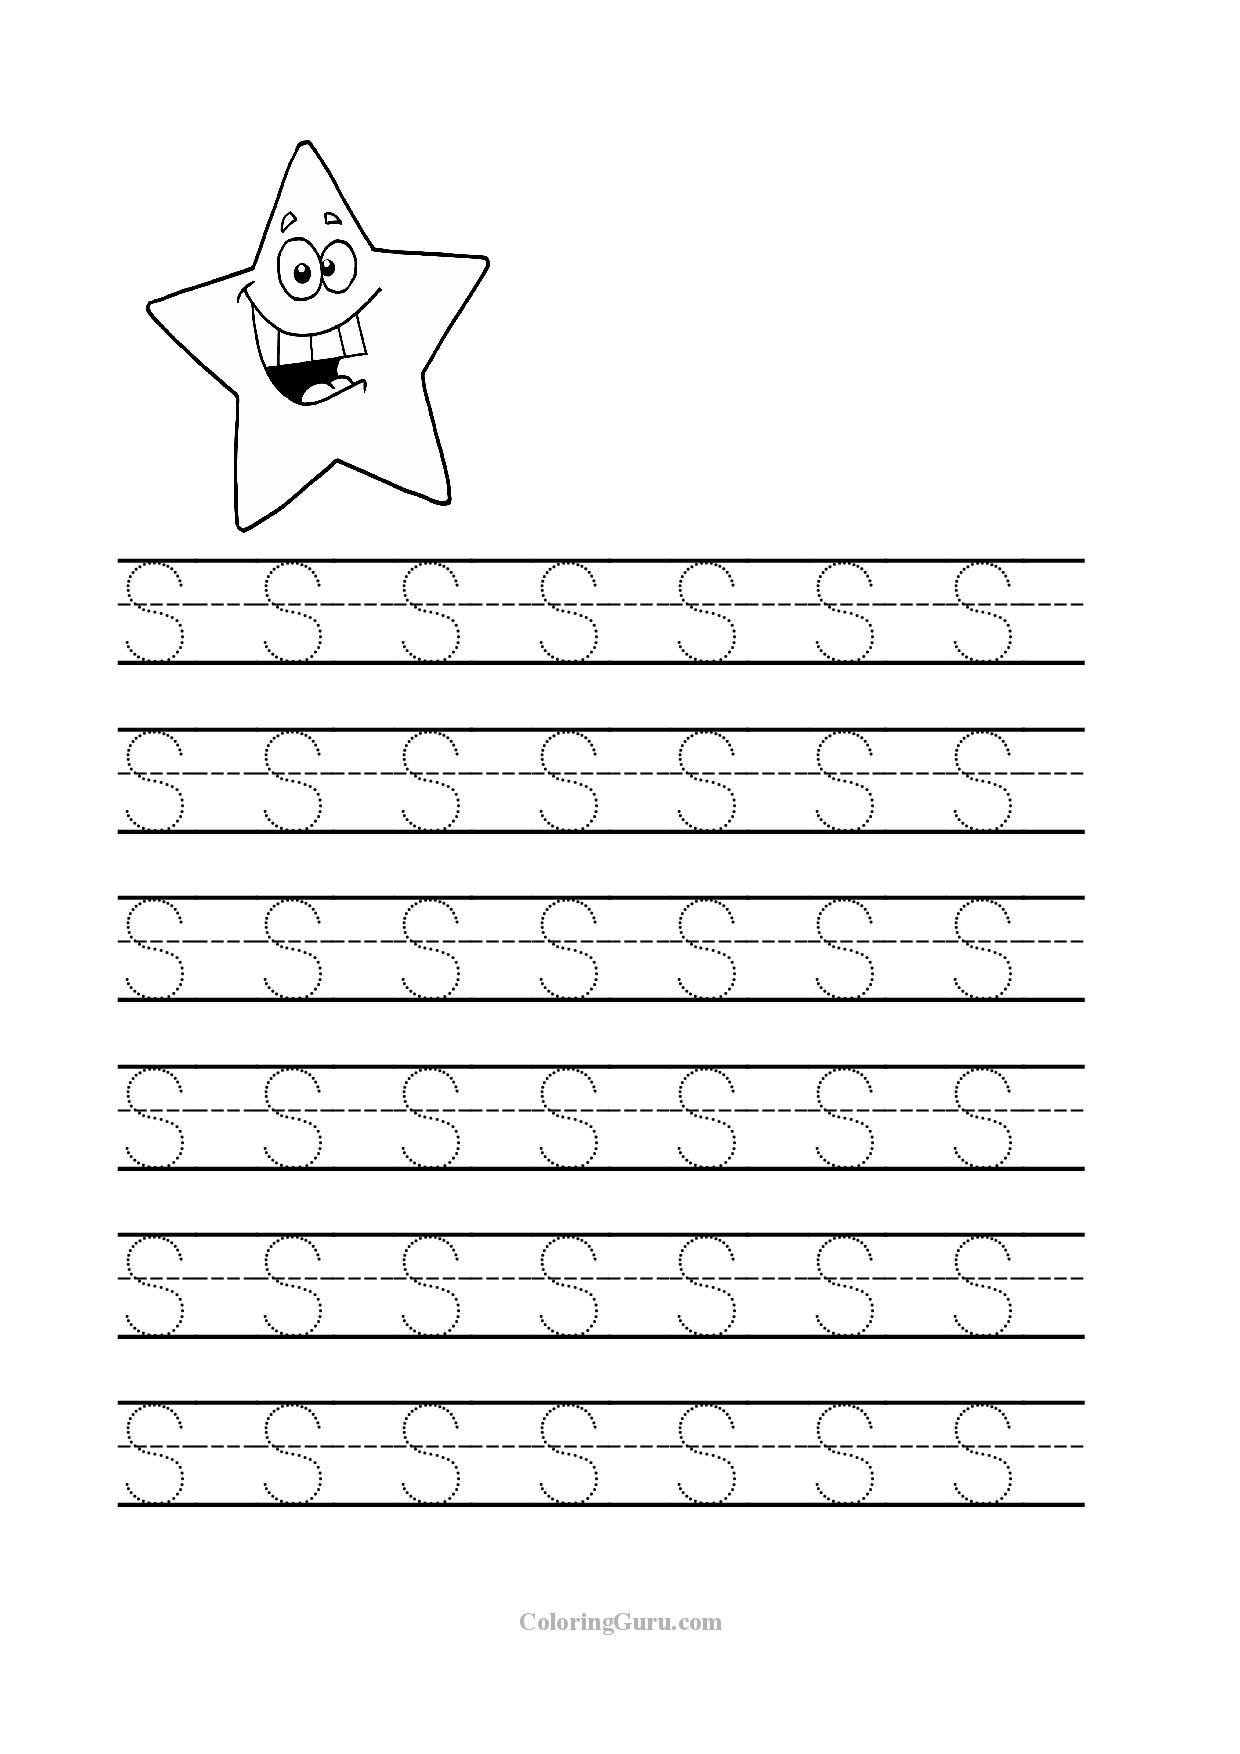 Free Printable Tracing Letter S Worksheets For Preschool inside Action Alphabet Tracing Letters